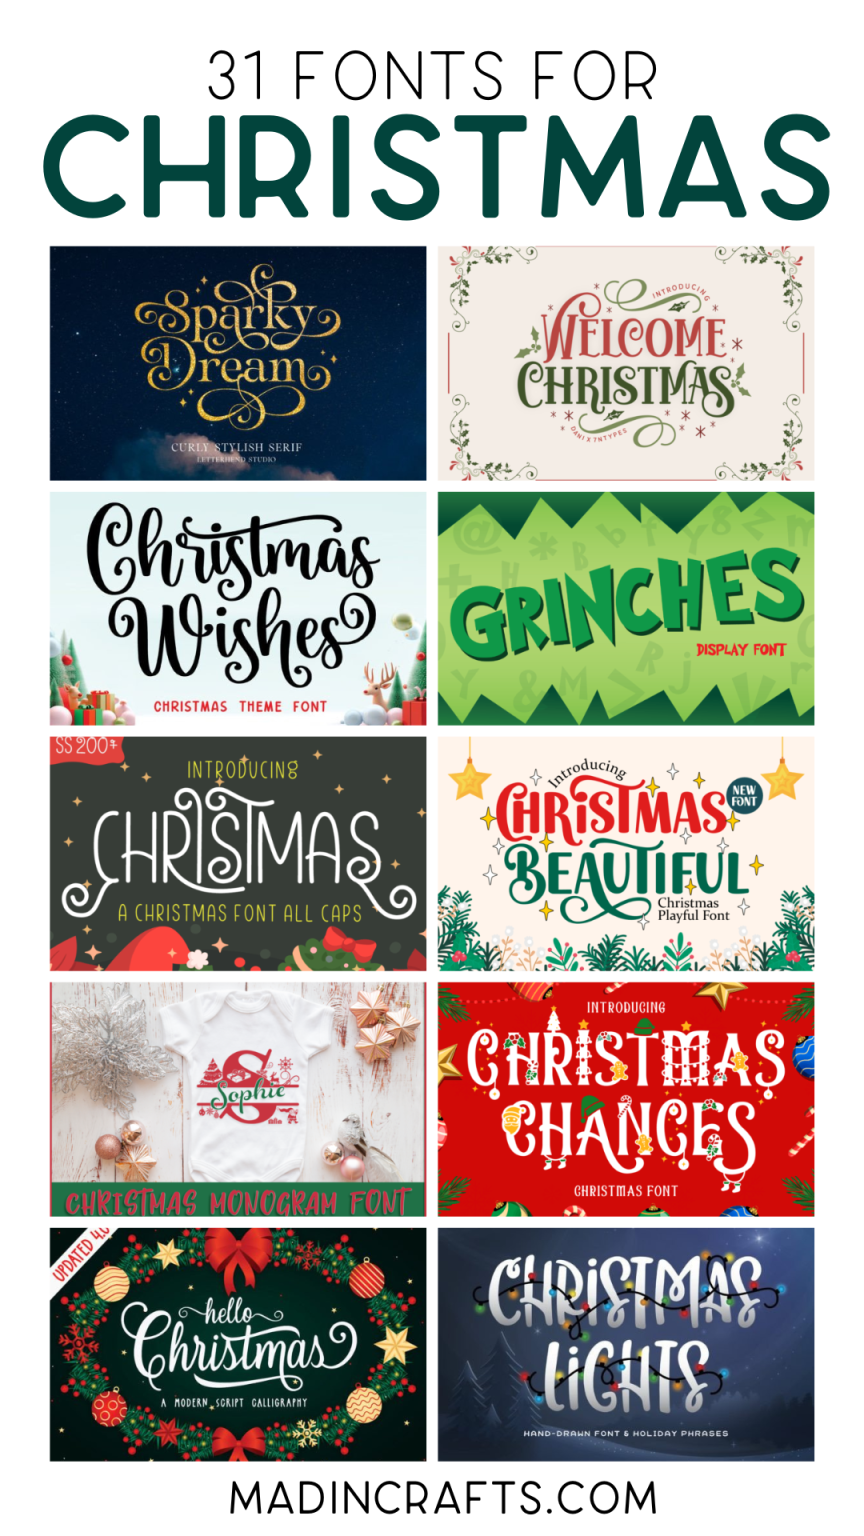 31 FESTIVE FONTS FOR CHRISTMAS Crafts Mad in Crafts